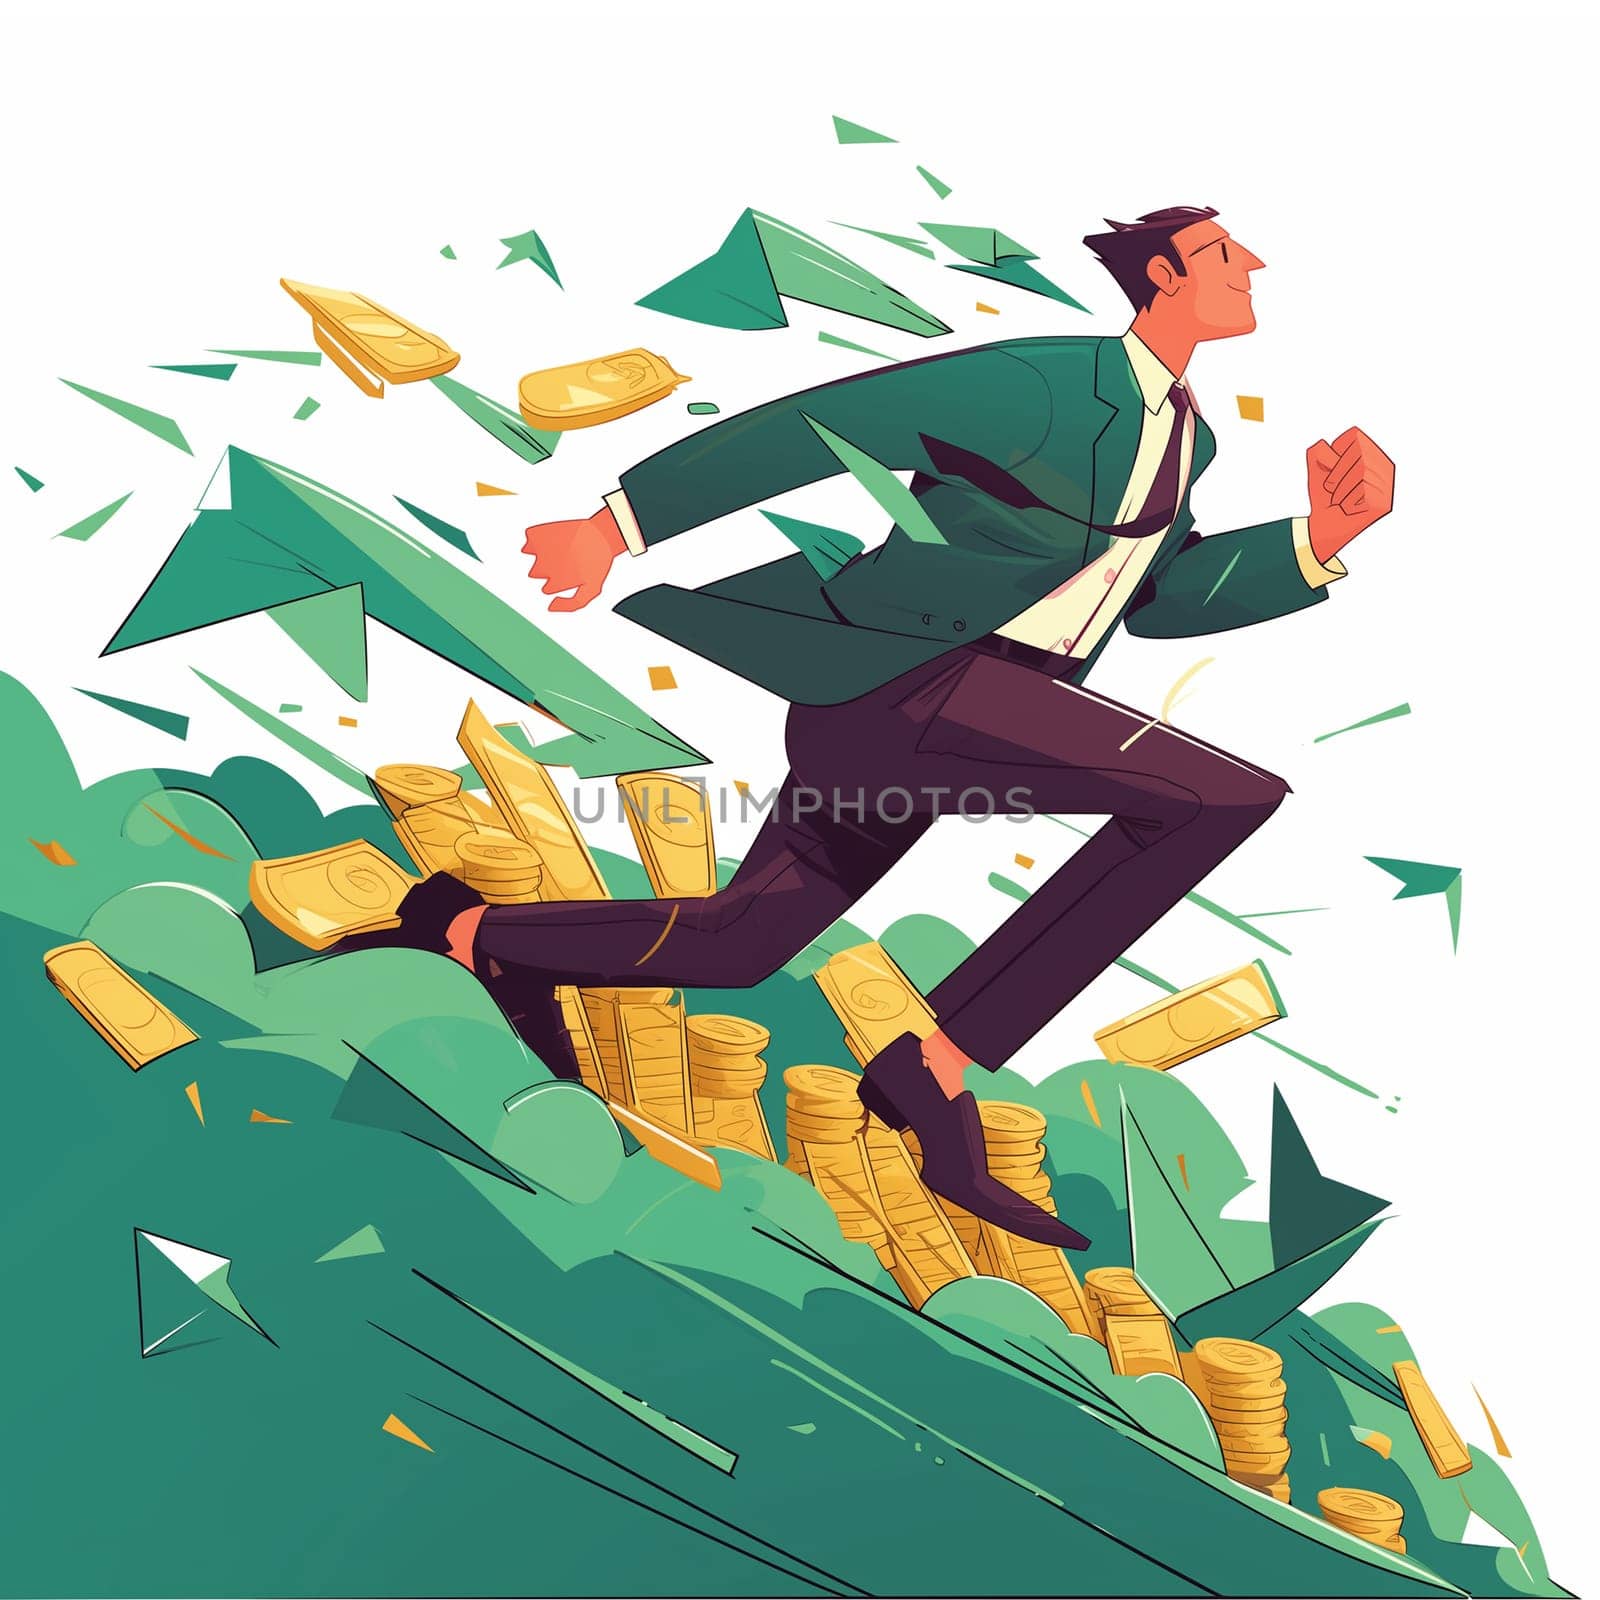 A businessman in a suit energetically running through a scattered pile of shiny coins.